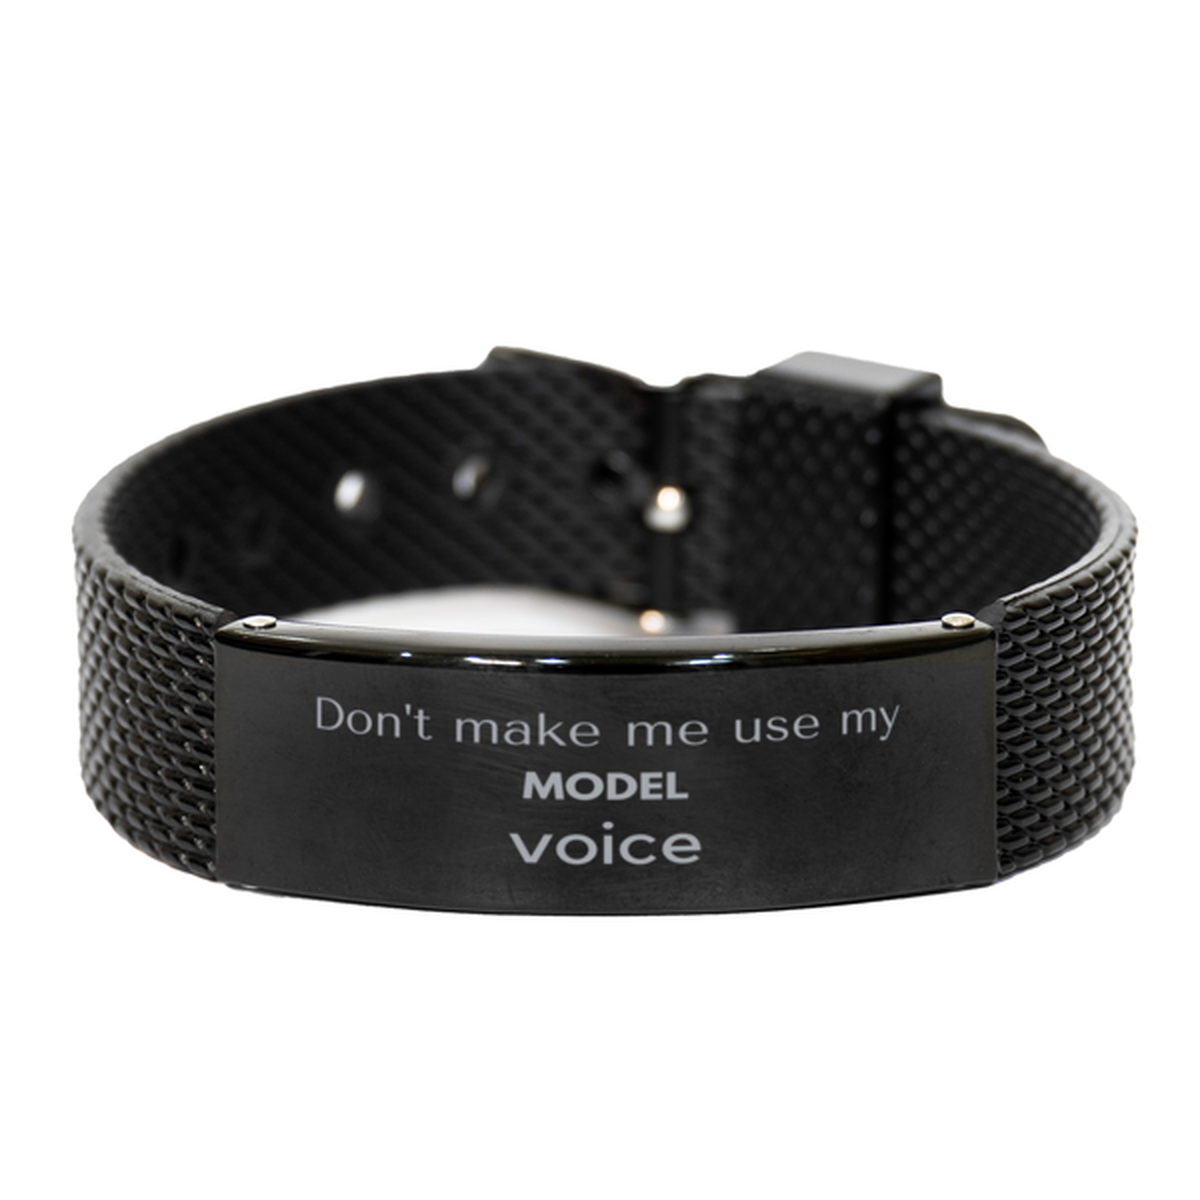 Don't make me use my Model voice, Sarcasm Model Gifts, Christmas Model Black Shark Mesh Bracelet Birthday Unique Gifts For Model Coworkers, Men, Women, Colleague, Friends